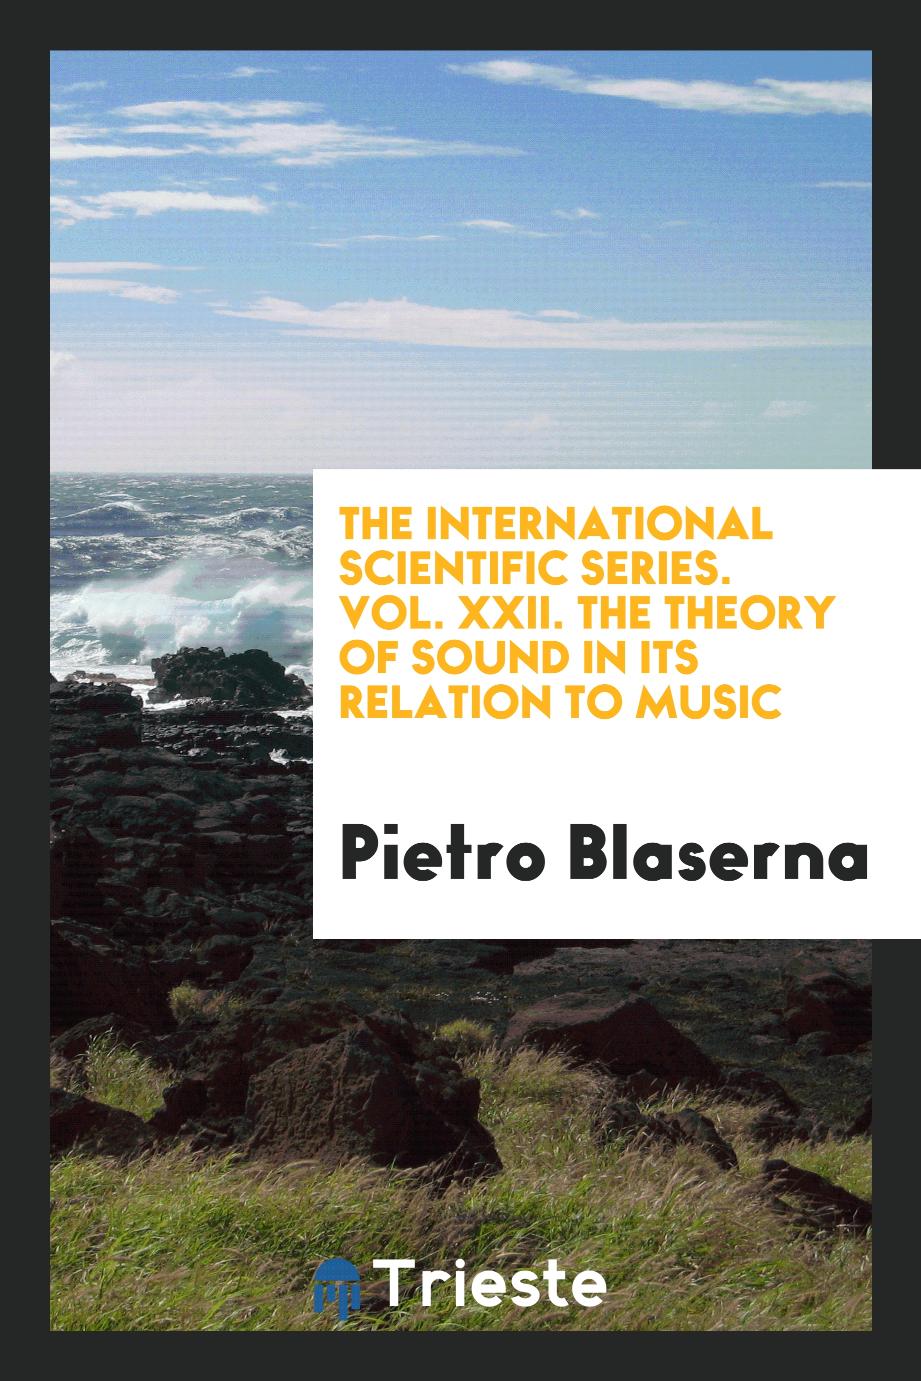 The international scientific series. Vol. XXII. The theory of sound in its relation to music